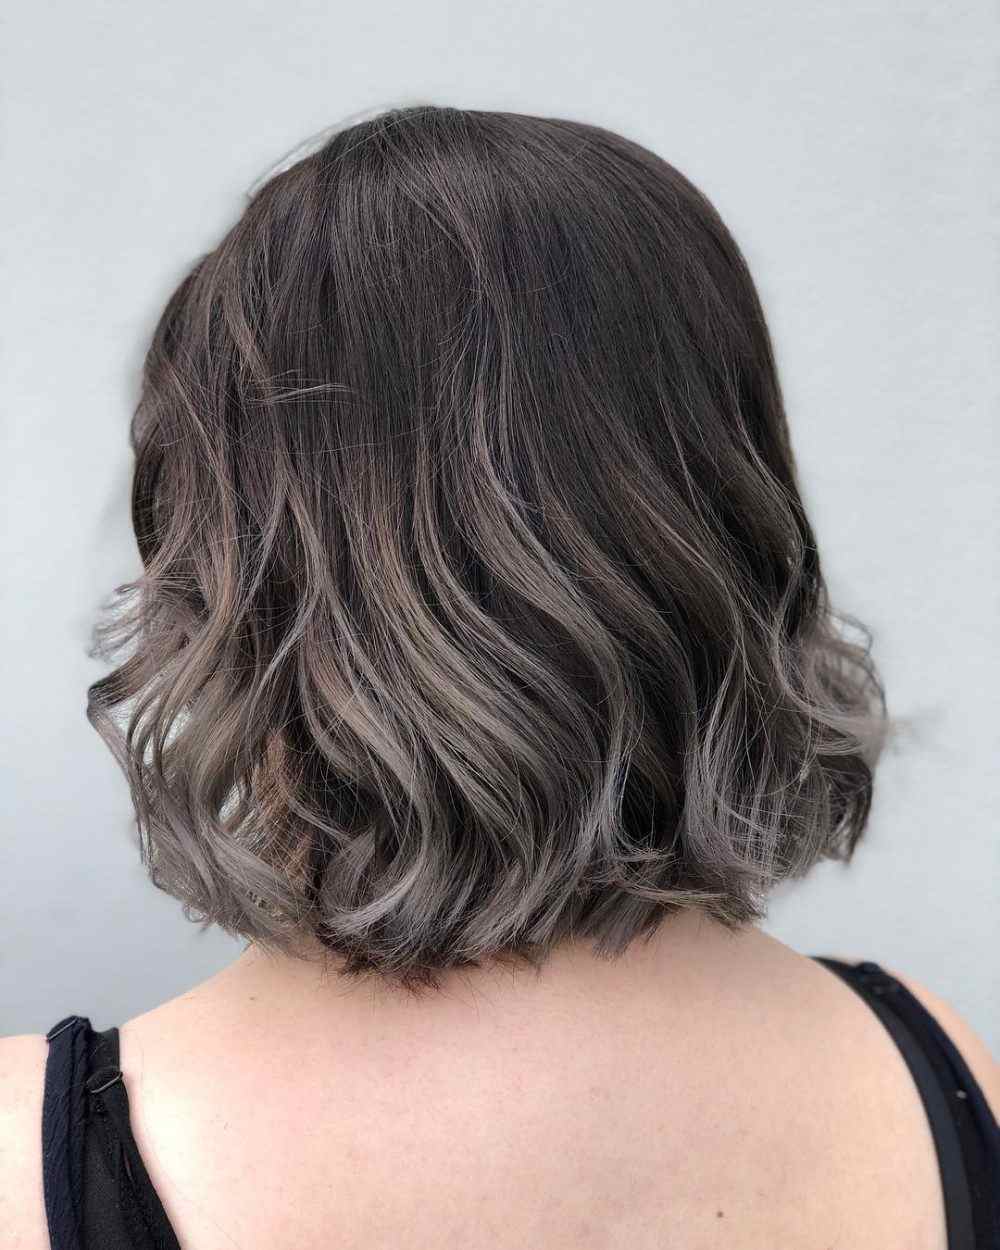 Silver hair dyed blonde blushes pretty hair style short bob hairstyle with locks